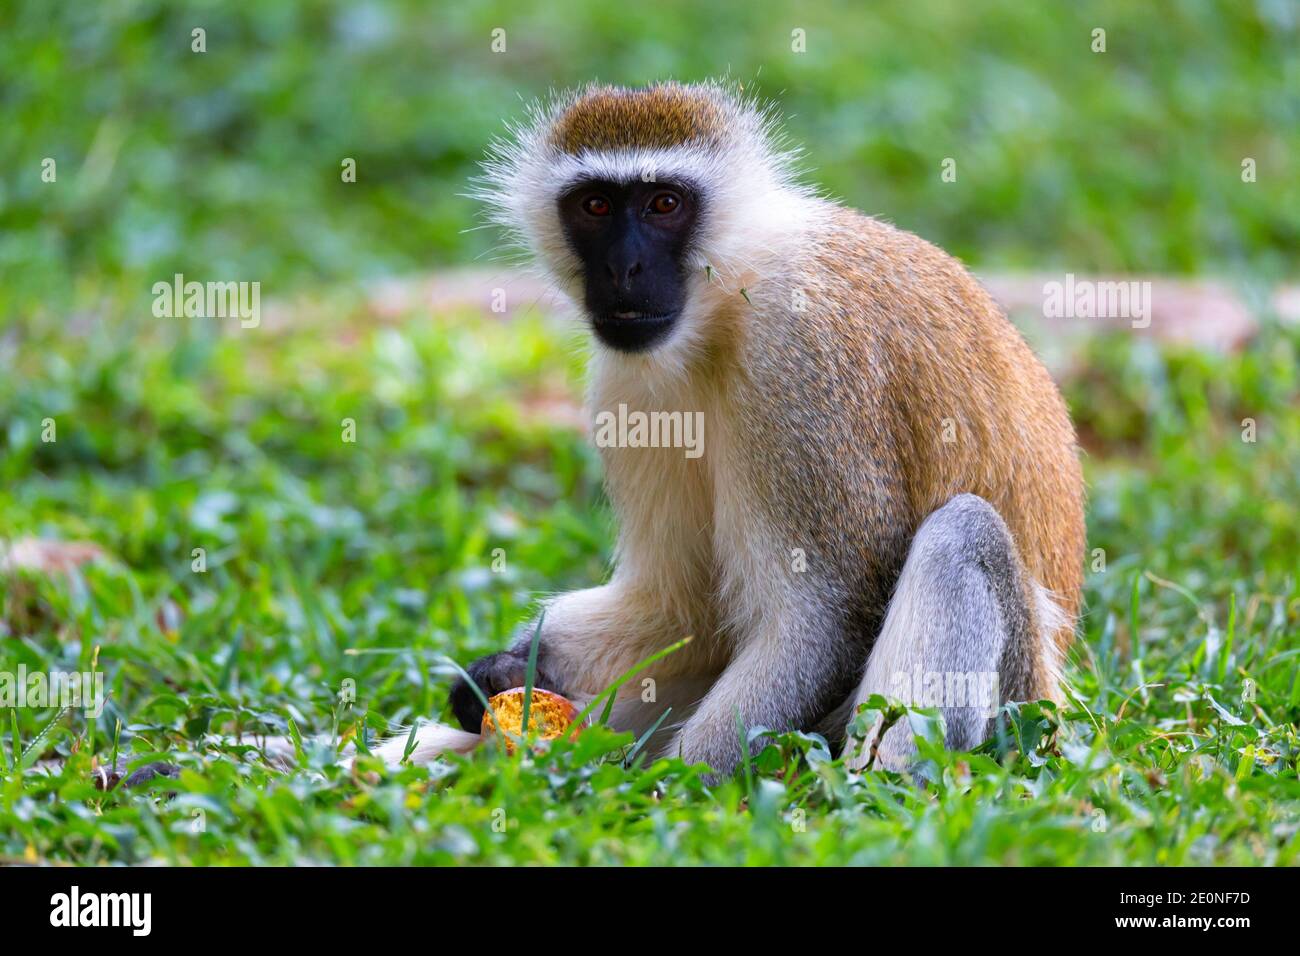 A monkey is doing a fruit meal in the grass. Stock Photo